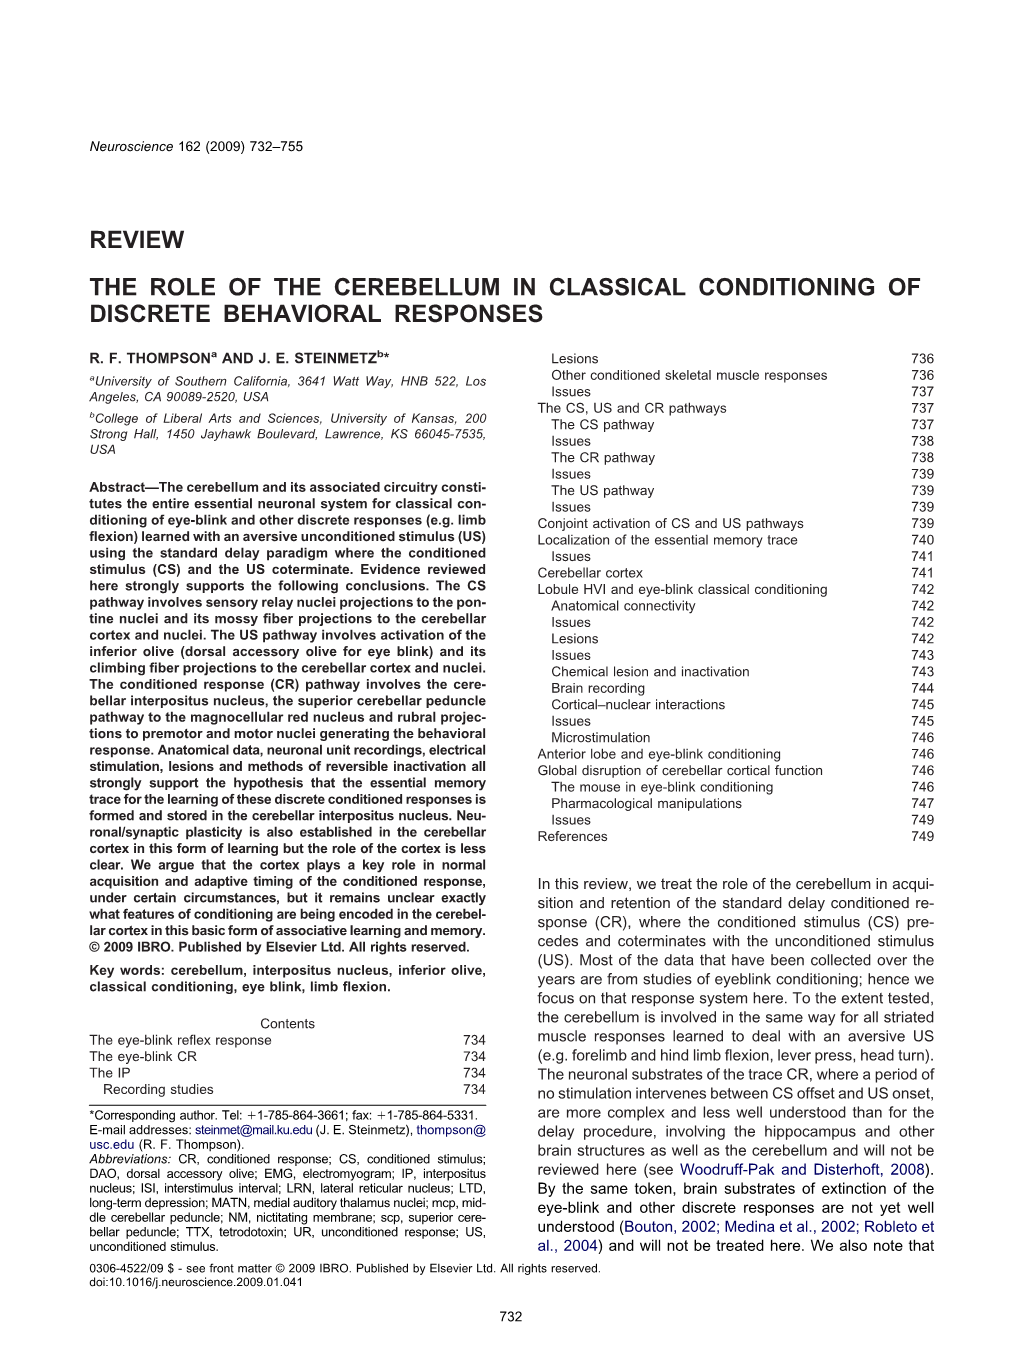 Review the Role of the Cerebellum in Classical Conditioning of Discrete Behavioral Responses